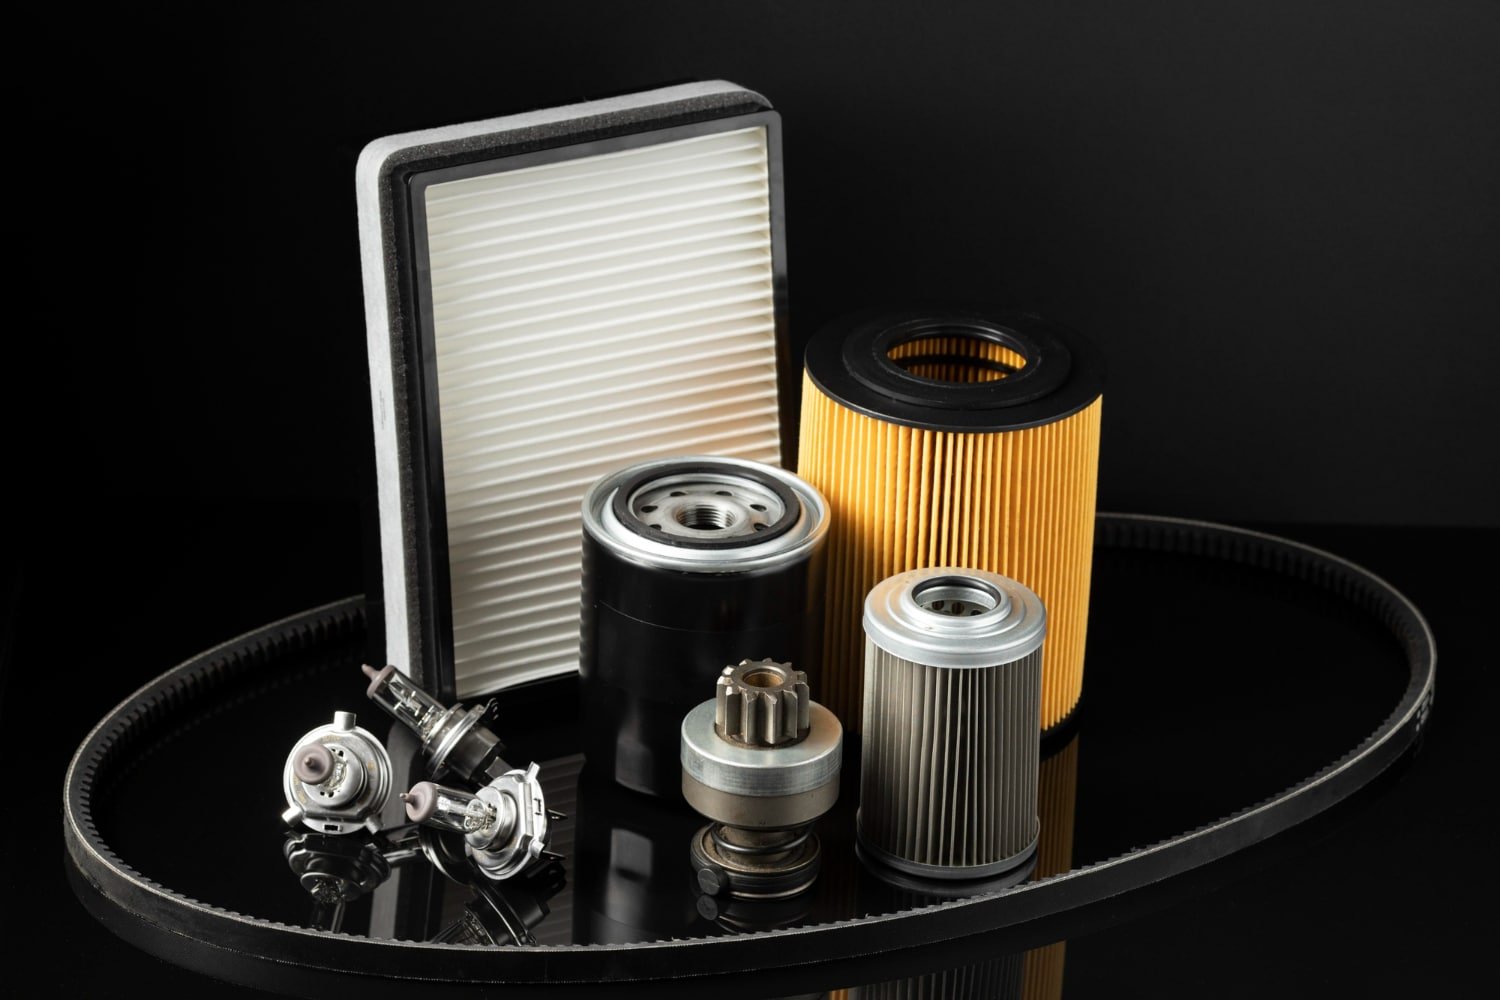 Upgrade Your Vehicle With Knfilters.com’s High-Performance Air Filters